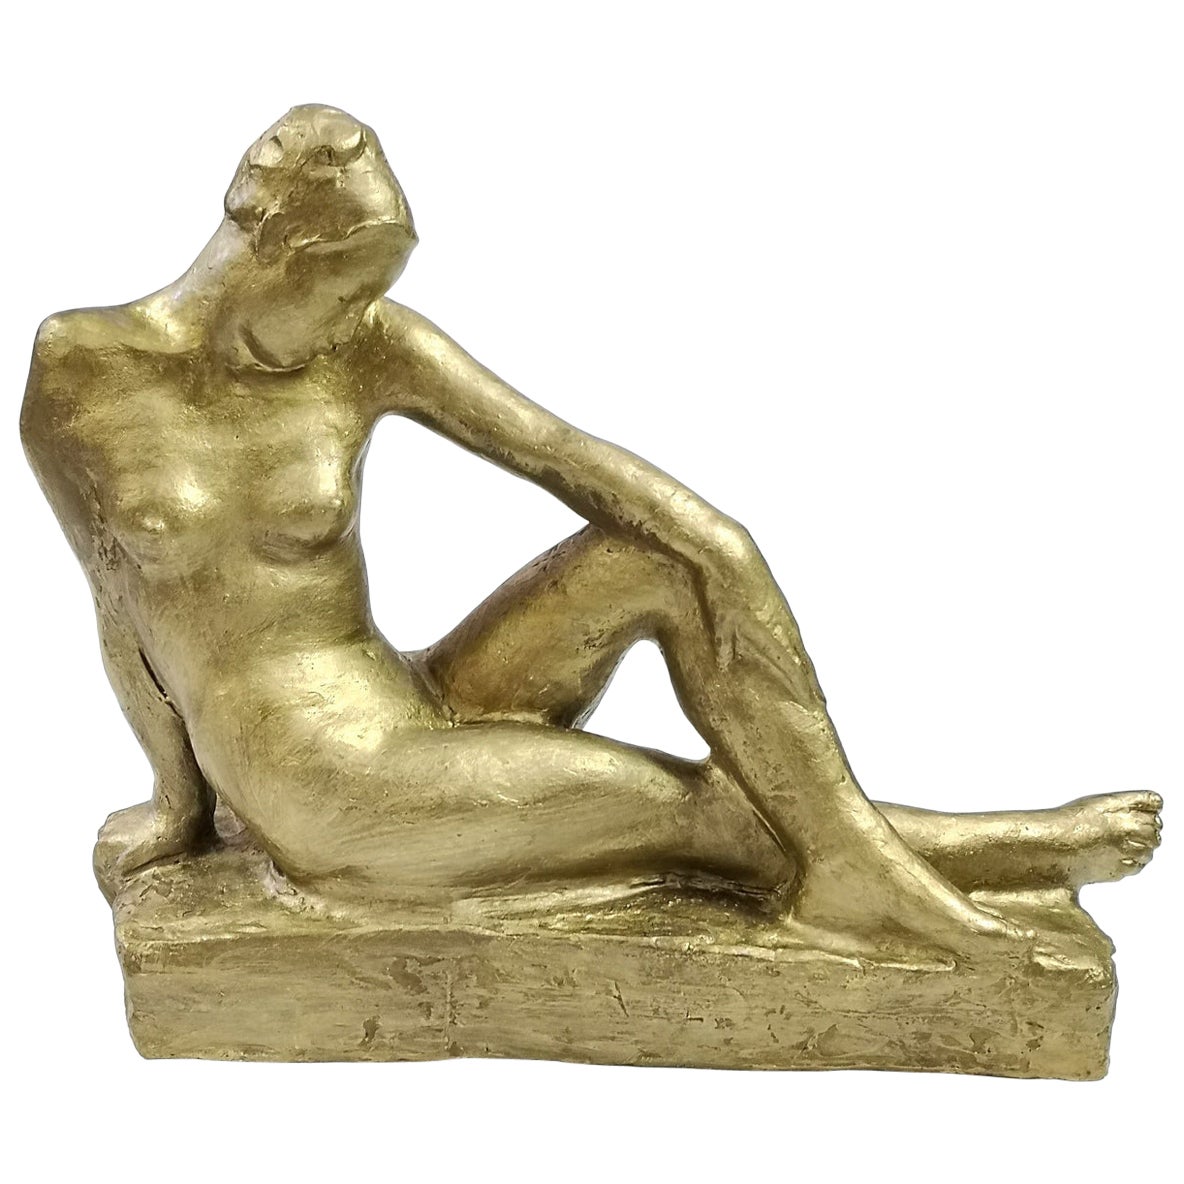 Reclining Nude Sculpture by Jeno Kerenyi, 1950's